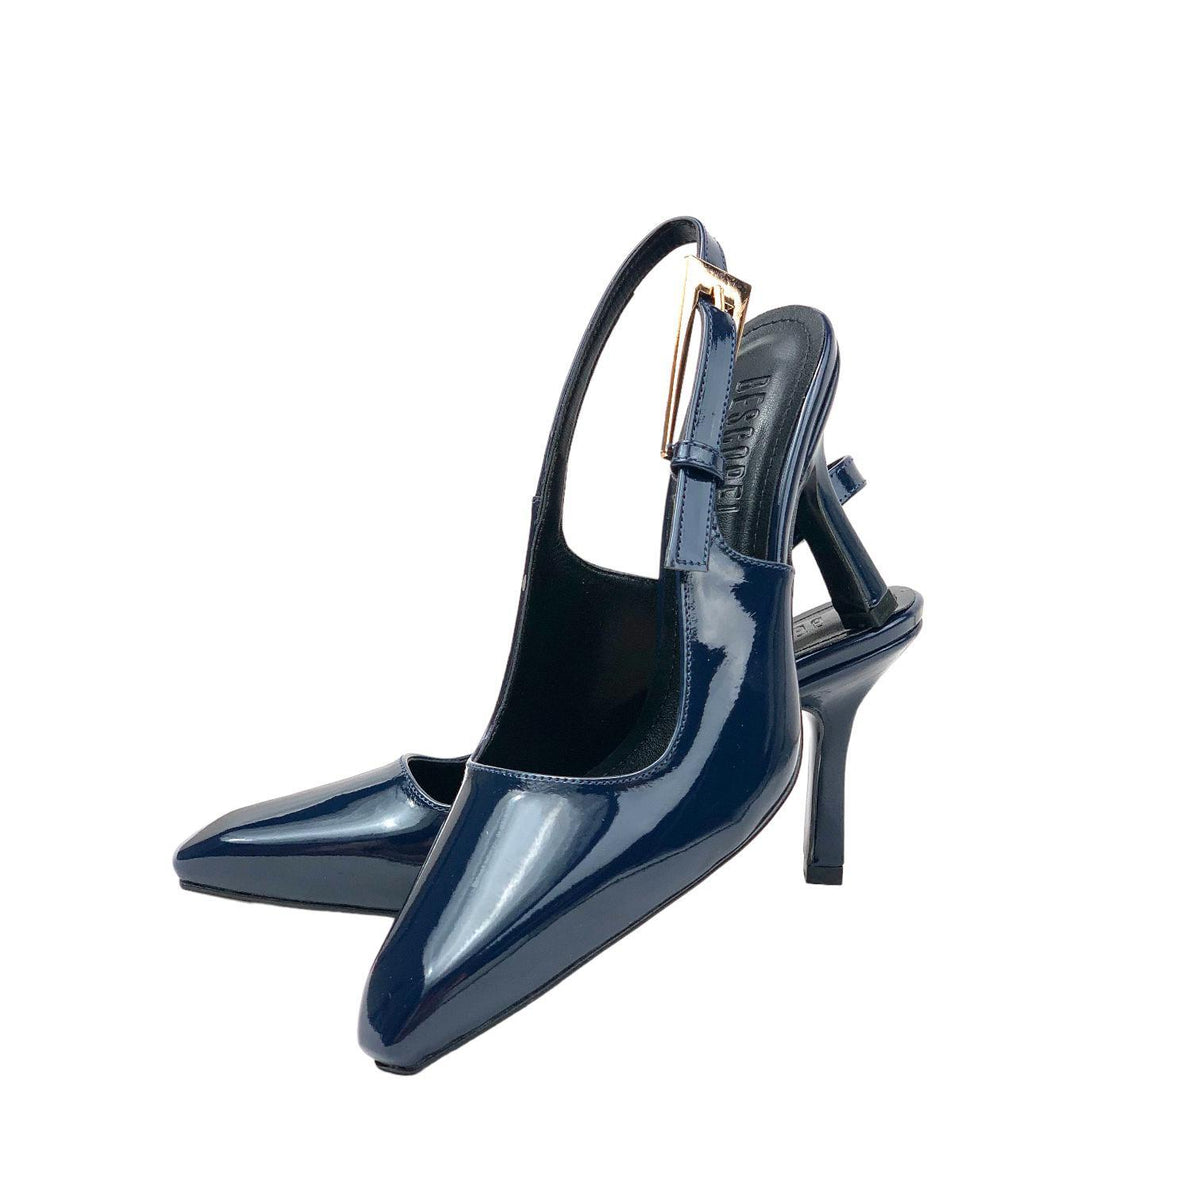 Women's Lery Navy Blue Patent Leather Heeled Shoes 9 cm - STREETMODE™